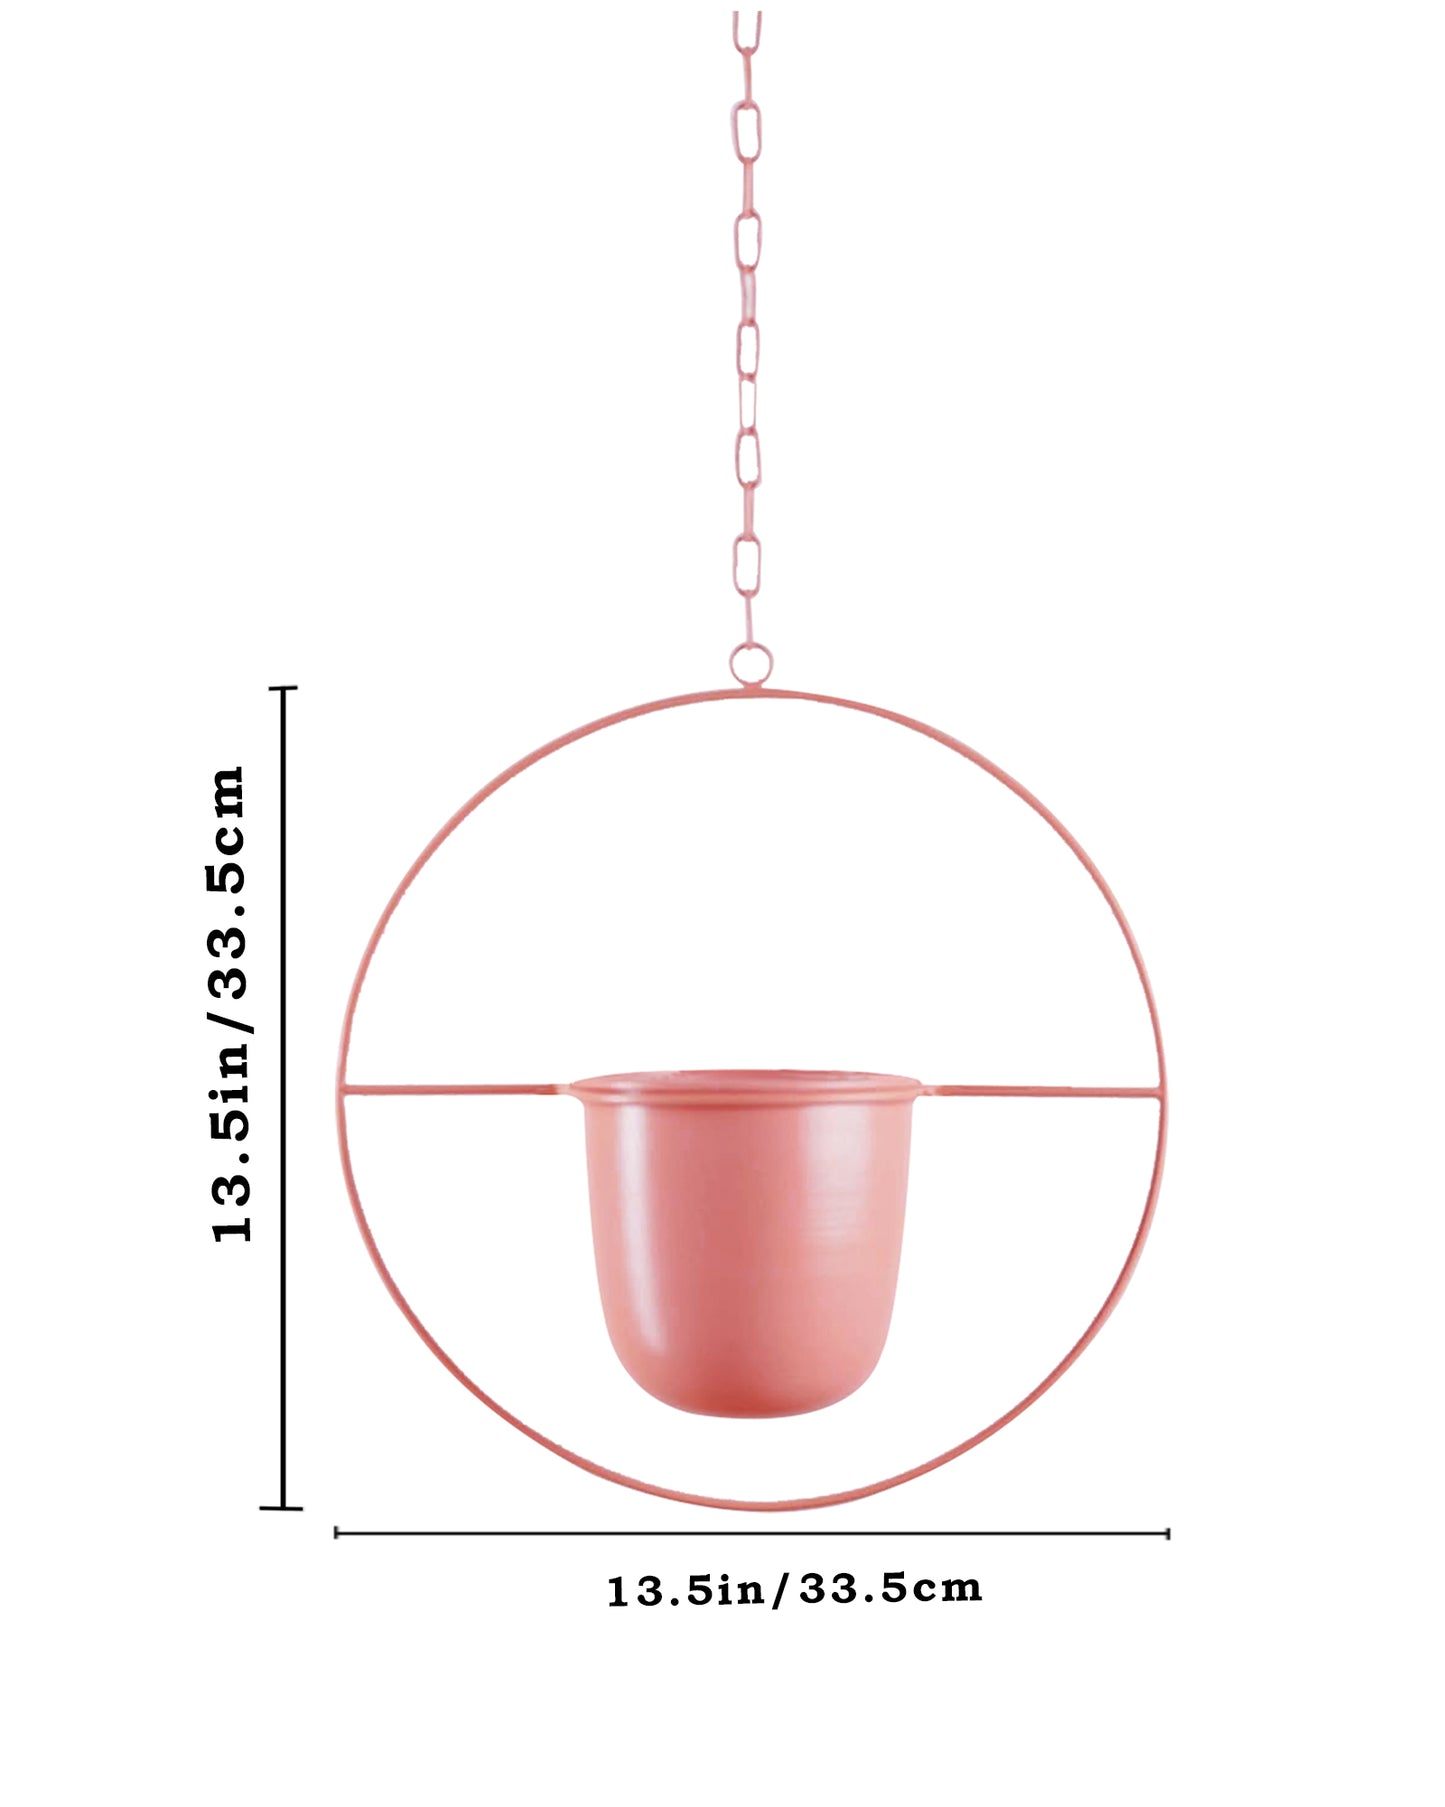 Round Hanging Metal Pot Stand with Planter (14 Inch Dia* 6.75 Inch Pot) for Indoor & Outdoor Plants Living Room Balcony Zen Decoration with hanging chain(Plant is not Included)